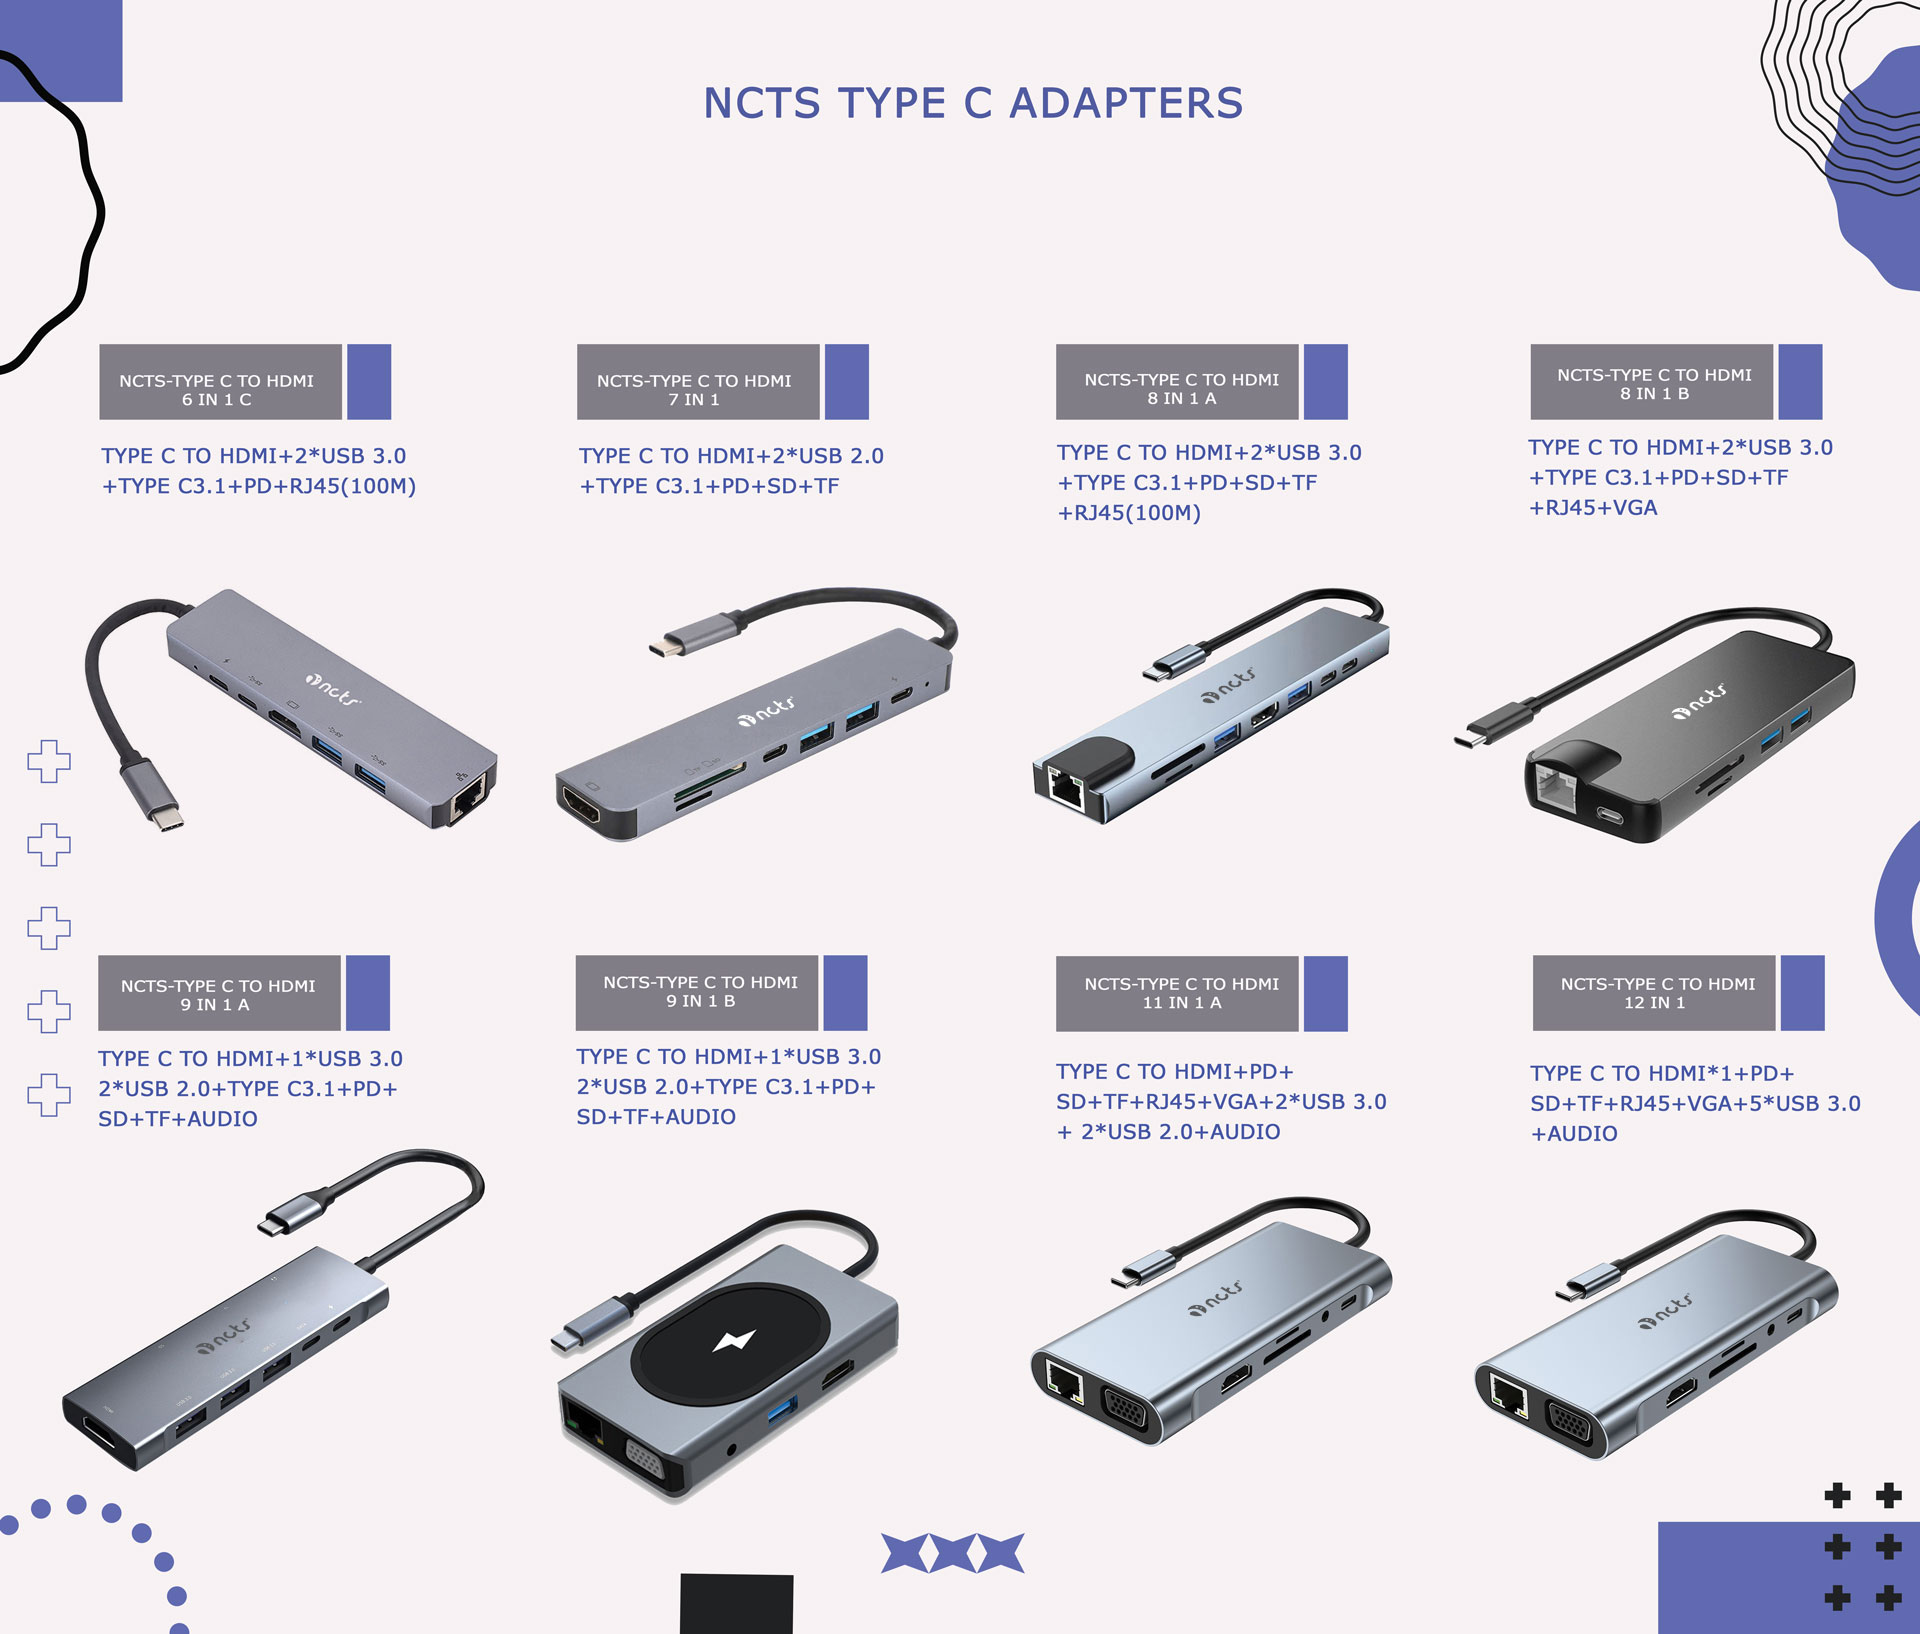 NCTS TYPE C ADAPTERS